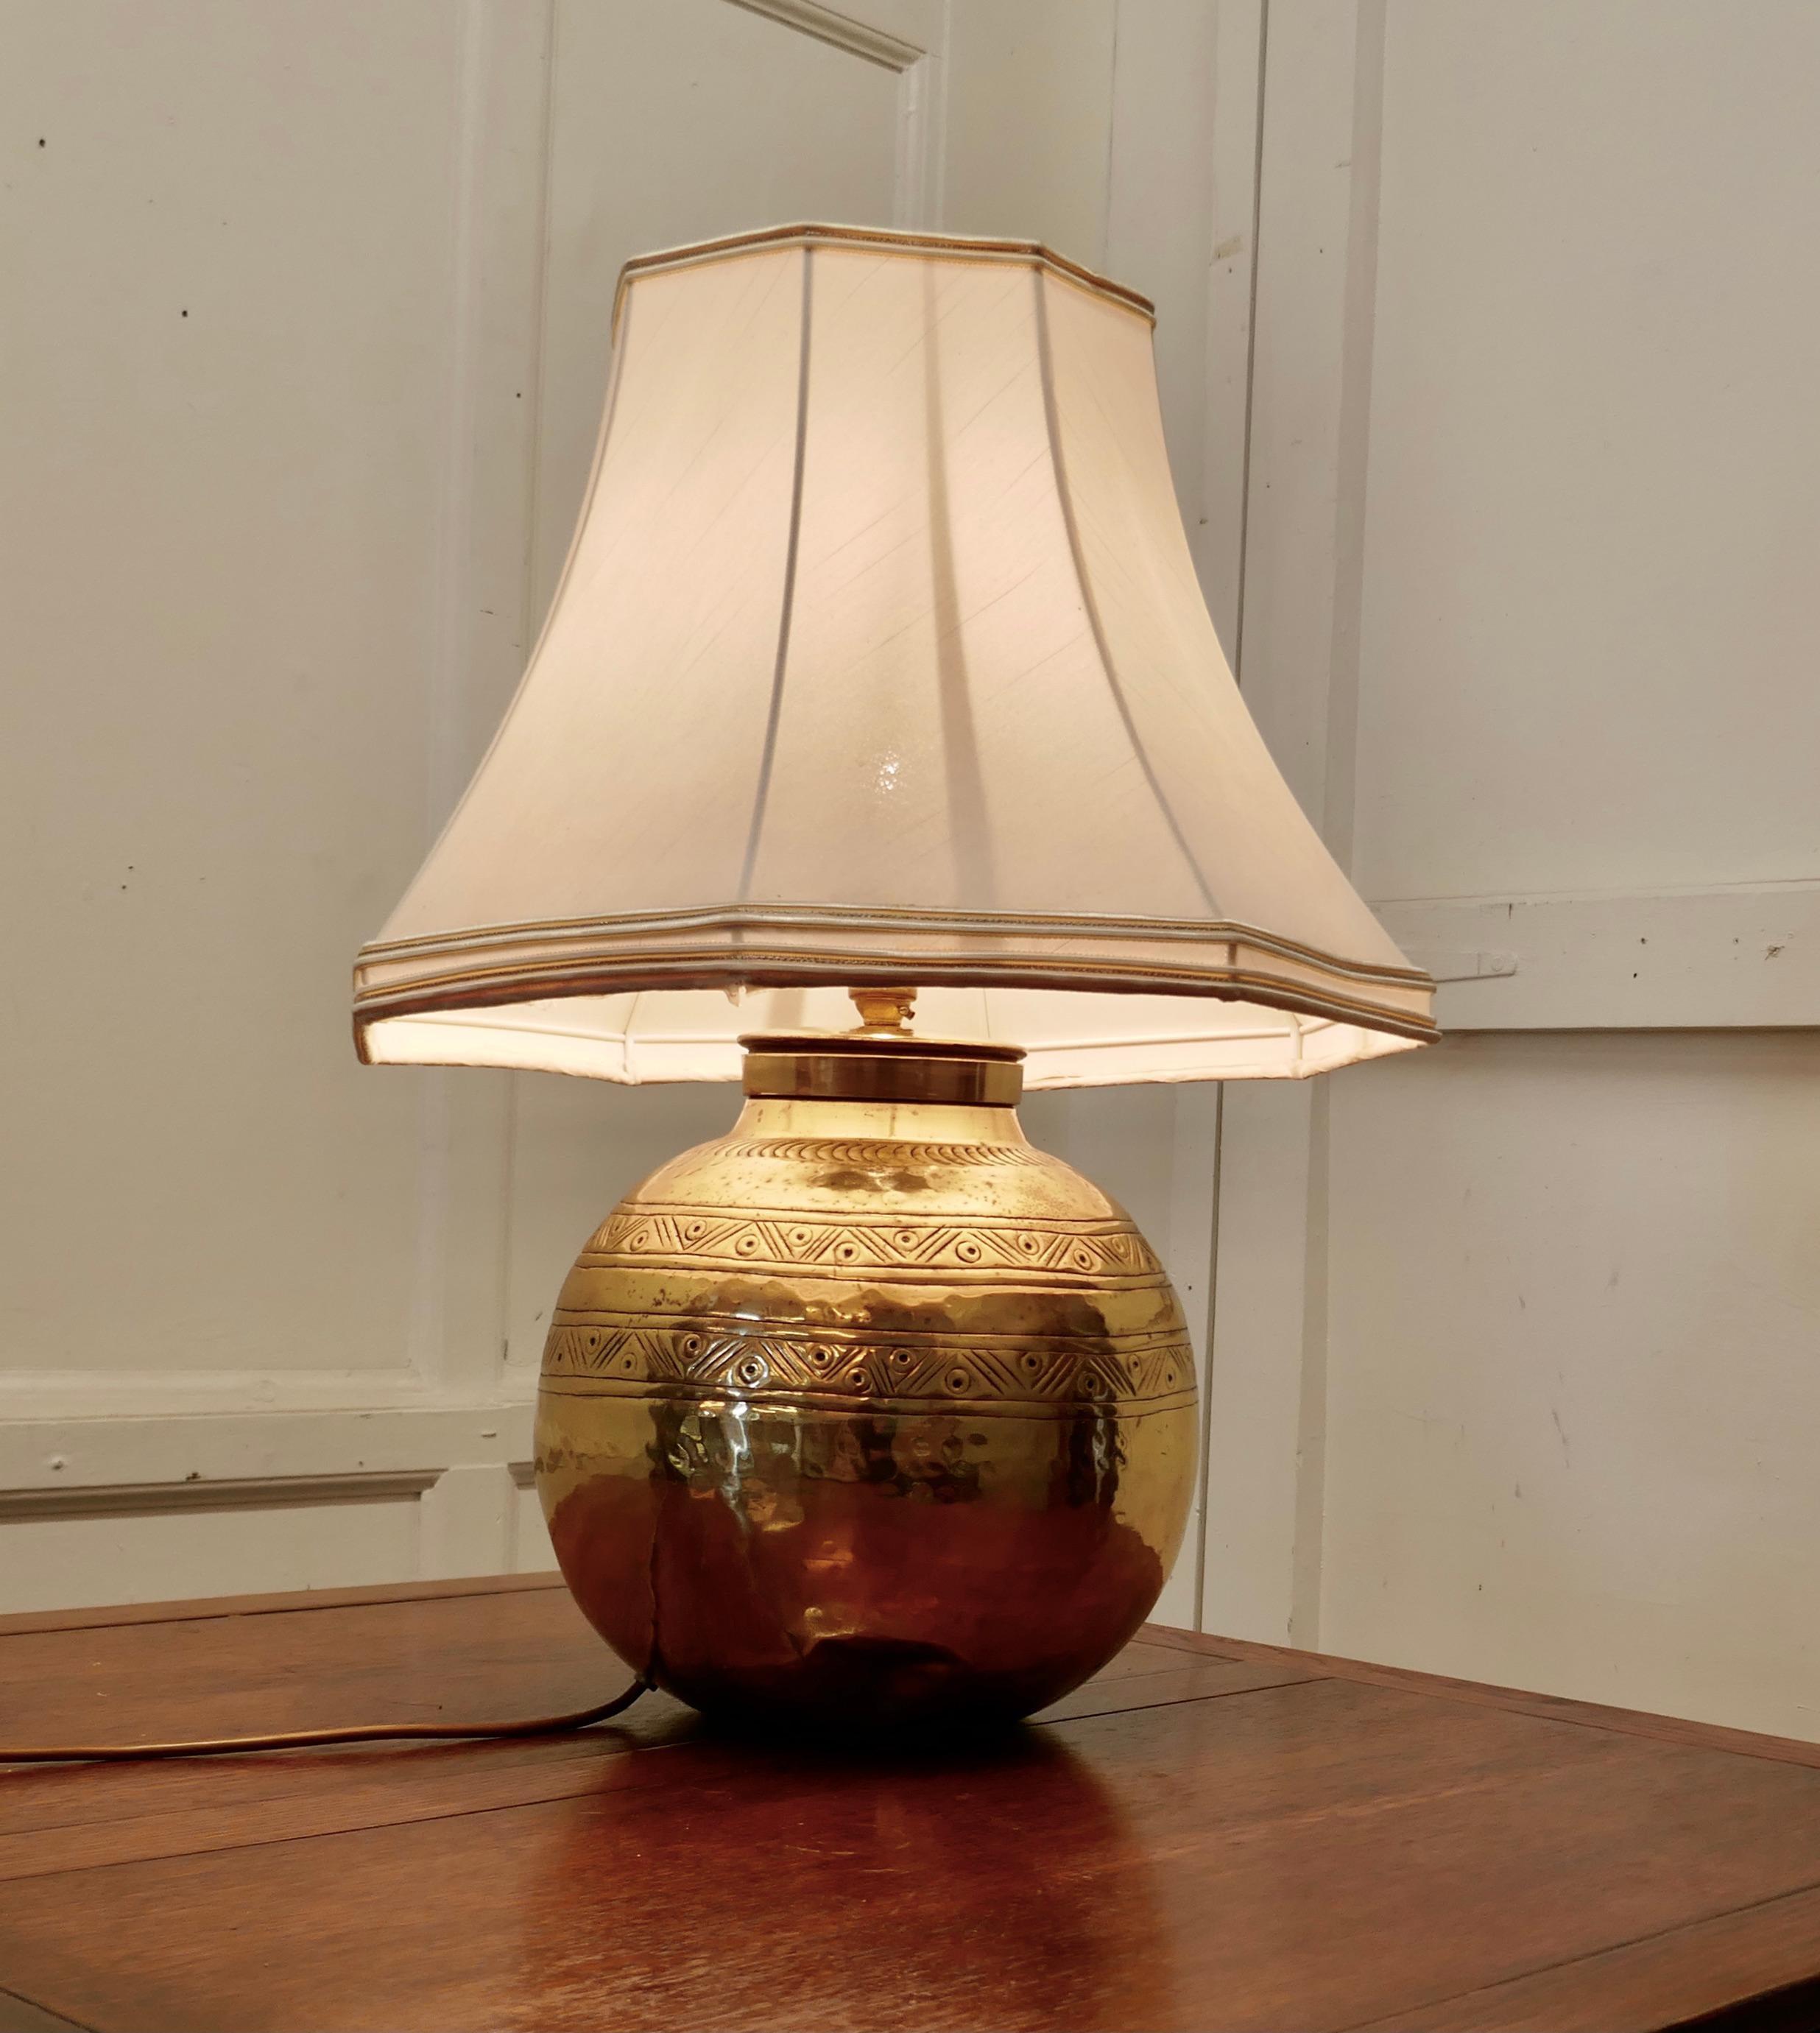 Large brass ball table lamp with hand beaten decoration

This is an unusual Lamp it has a globe shape and has hand beaten decoration around giving it an Ethnic look

The lamp is fully wired and has good natural aged patina, a statement piece in